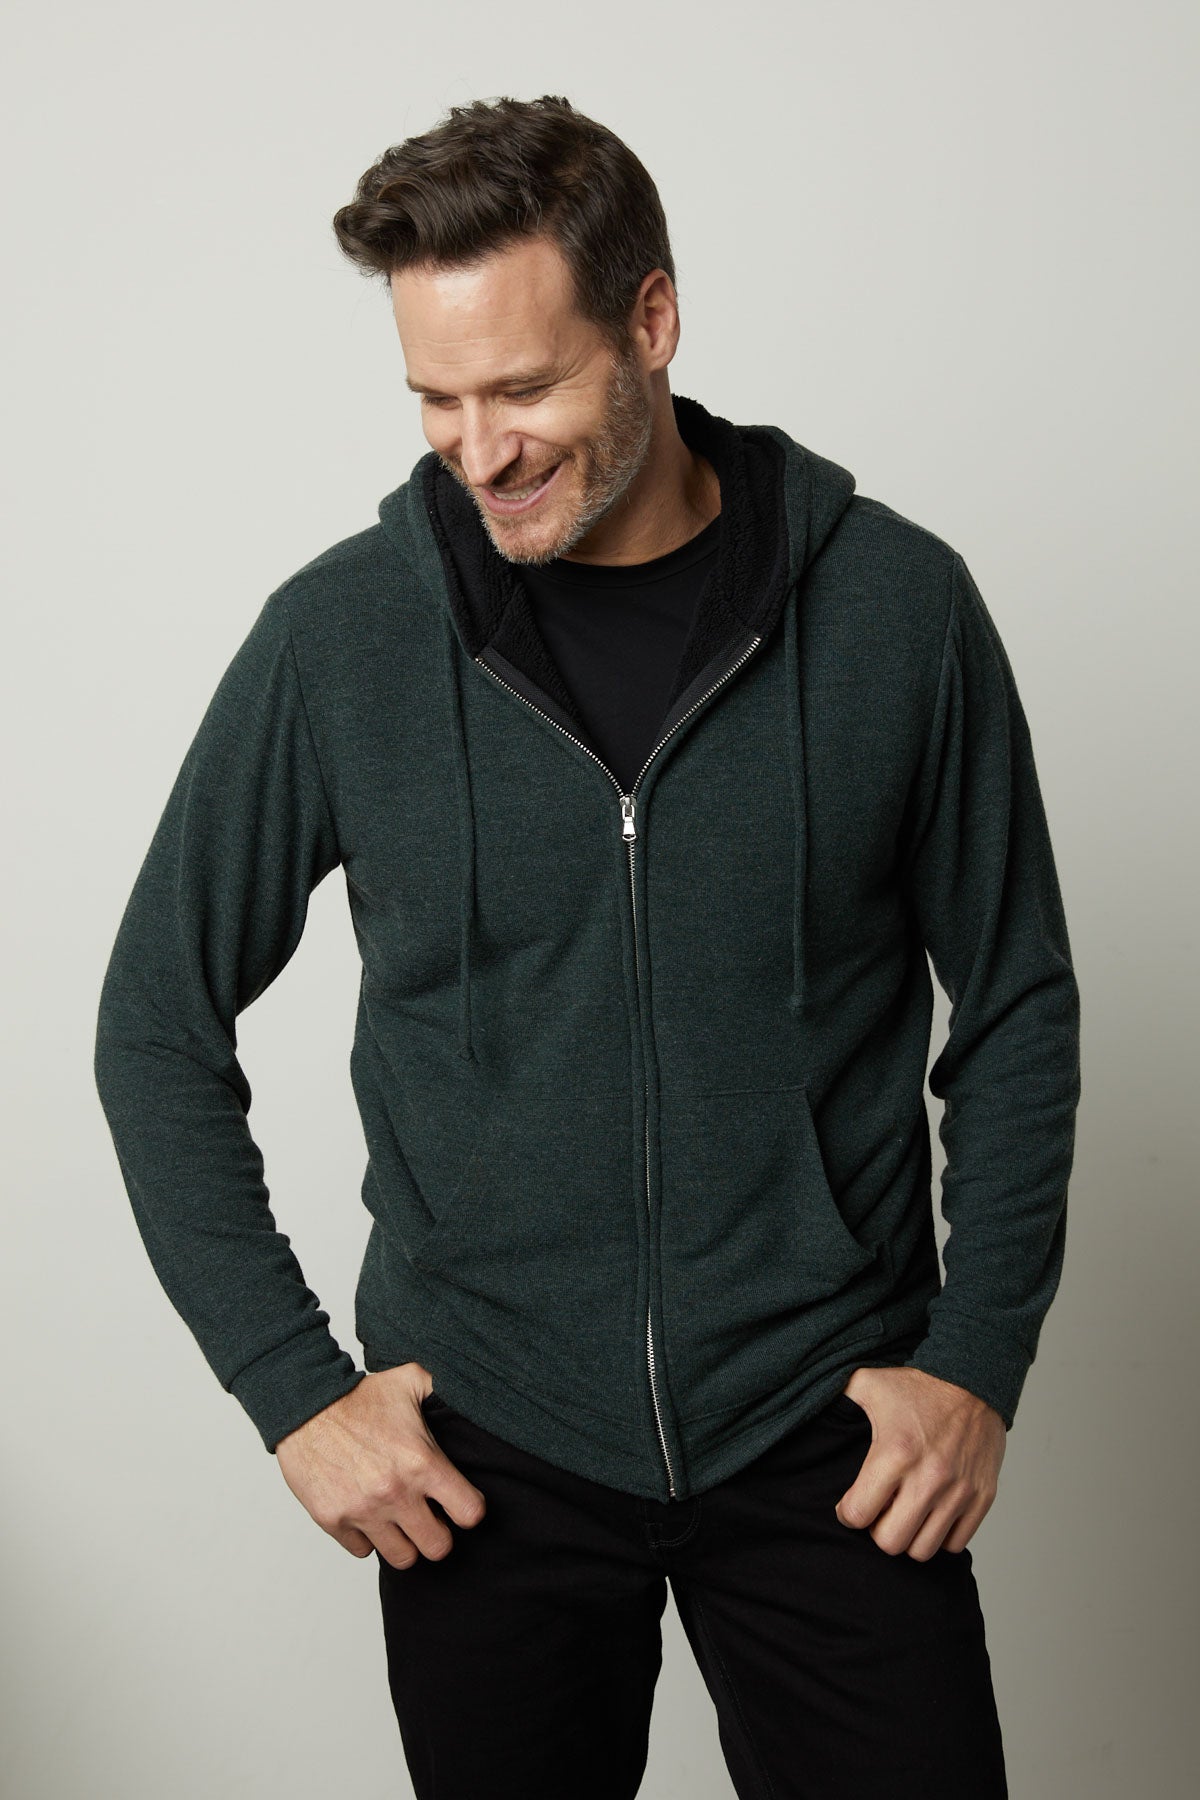   A man wearing a Velvet by Graham & Spencer SALVADORE SHERPA LINED HOODIE with an adjustable drawstring hood. 